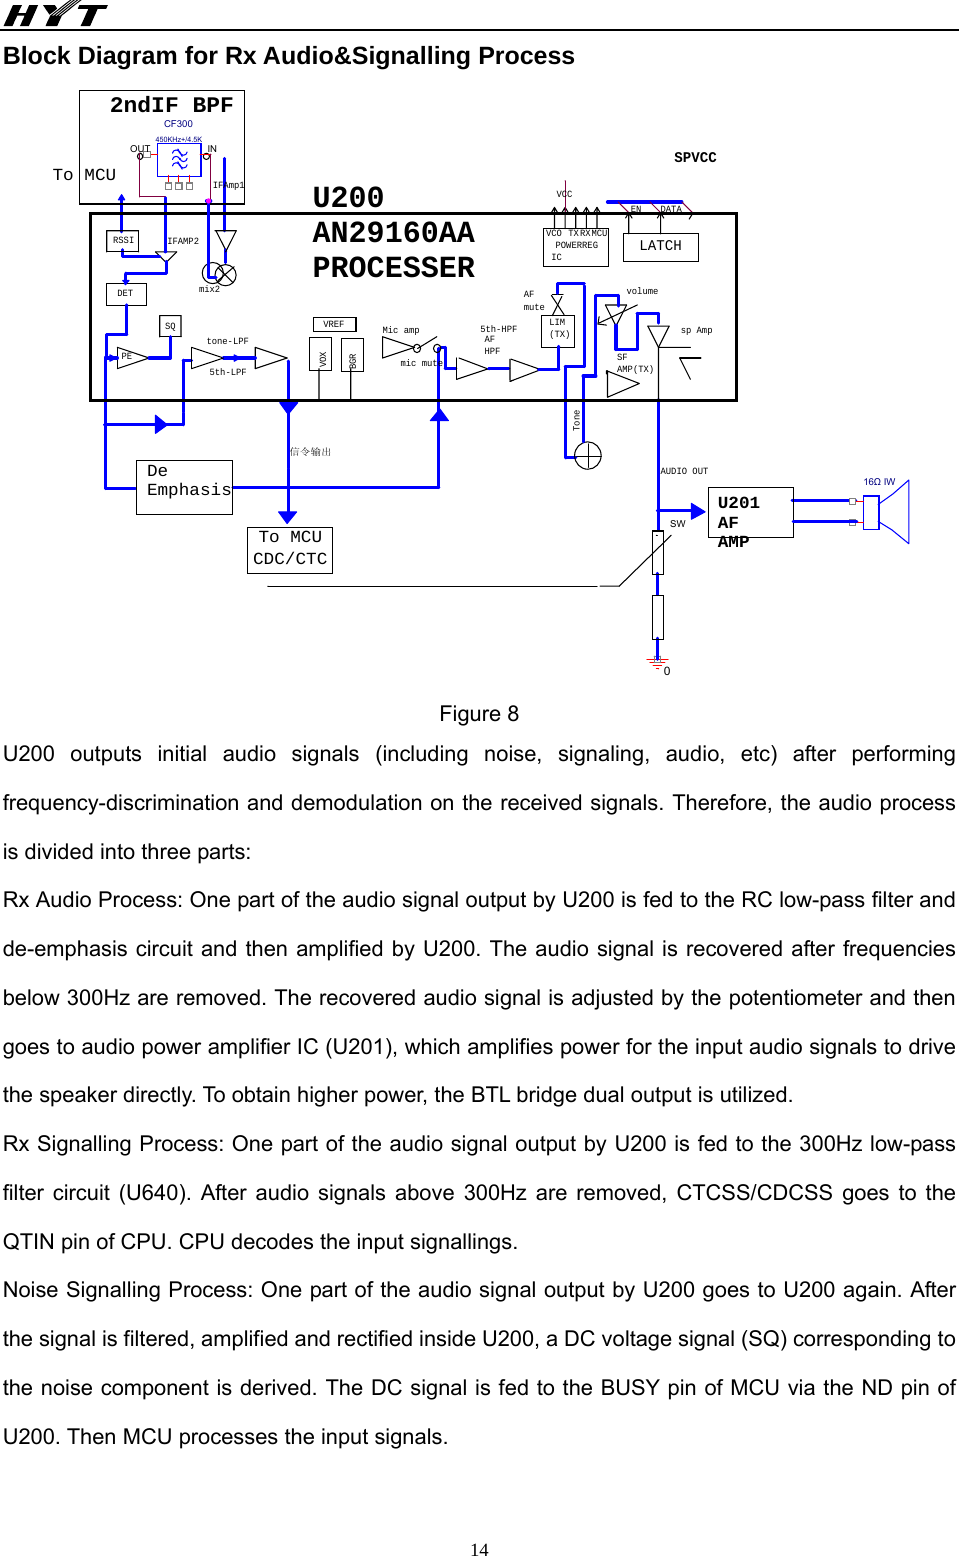                                                 14Block Diagram for Rx Audio&amp;Signalling Process RXsp Amp2ndIF BPFSFAMP(TX)VOXTonetone-LPFDETBGRENRSSIMic ampVCODATA05th-LPFIFAMP2AFHPFPE信令输出5th-HPFIFAmp1SWTo MCUICCF300450KHz+/4.5KOUT INVREFTXDeEmphasisLATCHAFmuteSPVCCvolumeTo MCUCDC/CTCMCUmix2mic mutePOWERREGVCCLIM(TX)SQAUDIO OUT16Ω IWU201AFAMPU200AN29160AAPROCESSER Figure 8 U200 outputs initial audio signals (including noise, signaling, audio, etc) after performing frequency-discrimination and demodulation on the received signals. Therefore, the audio process is divided into three parts: Rx Audio Process: One part of the audio signal output by U200 is fed to the RC low-pass filter and de-emphasis circuit and then amplified by U200. The audio signal is recovered after frequencies below 300Hz are removed. The recovered audio signal is adjusted by the potentiometer and then goes to audio power amplifier IC (U201), which amplifies power for the input audio signals to drive the speaker directly. To obtain higher power, the BTL bridge dual output is utilized.   Rx Signalling Process: One part of the audio signal output by U200 is fed to the 300Hz low-pass filter circuit (U640). After audio signals above 300Hz are removed, CTCSS/CDCSS goes to the QTIN pin of CPU. CPU decodes the input signallings. Noise Signalling Process: One part of the audio signal output by U200 goes to U200 again. After the signal is filtered, amplified and rectified inside U200, a DC voltage signal (SQ) corresponding to the noise component is derived. The DC signal is fed to the BUSY pin of MCU via the ND pin of U200. Then MCU processes the input signals.  